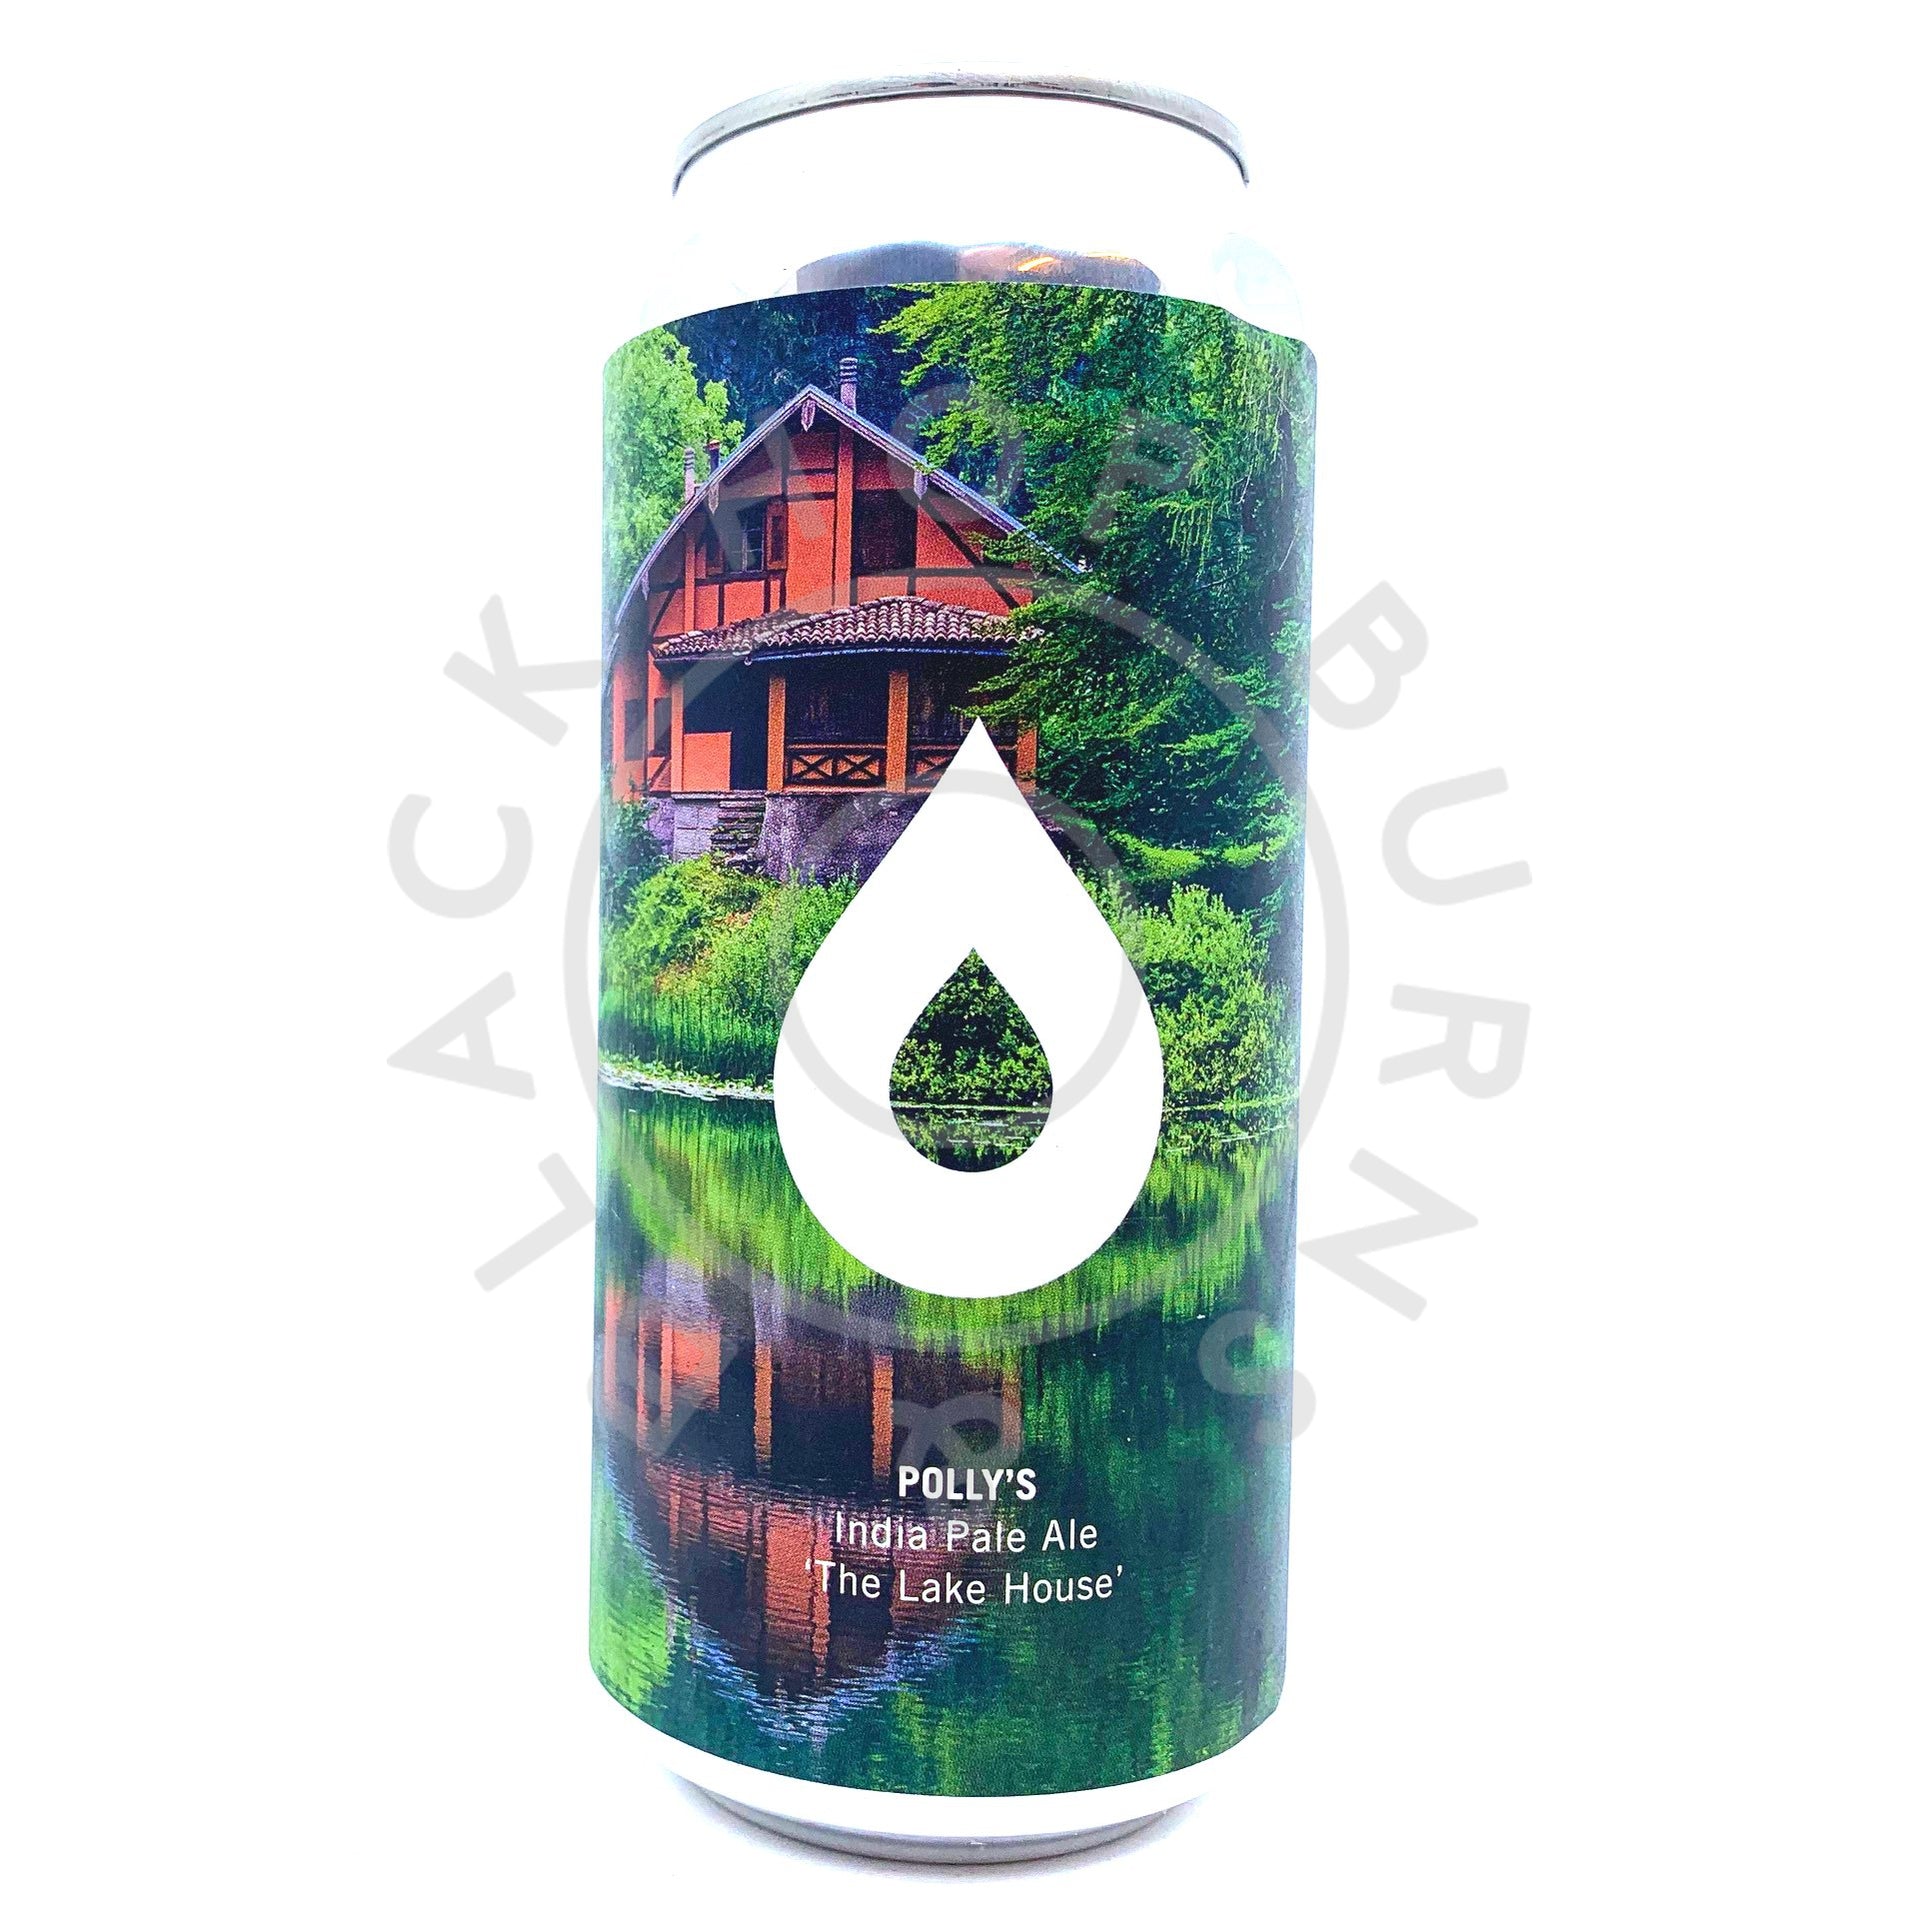 Polly's Brew Co The Lakehouse IPA 6.1% (440ml can)-Hop Burns & Black